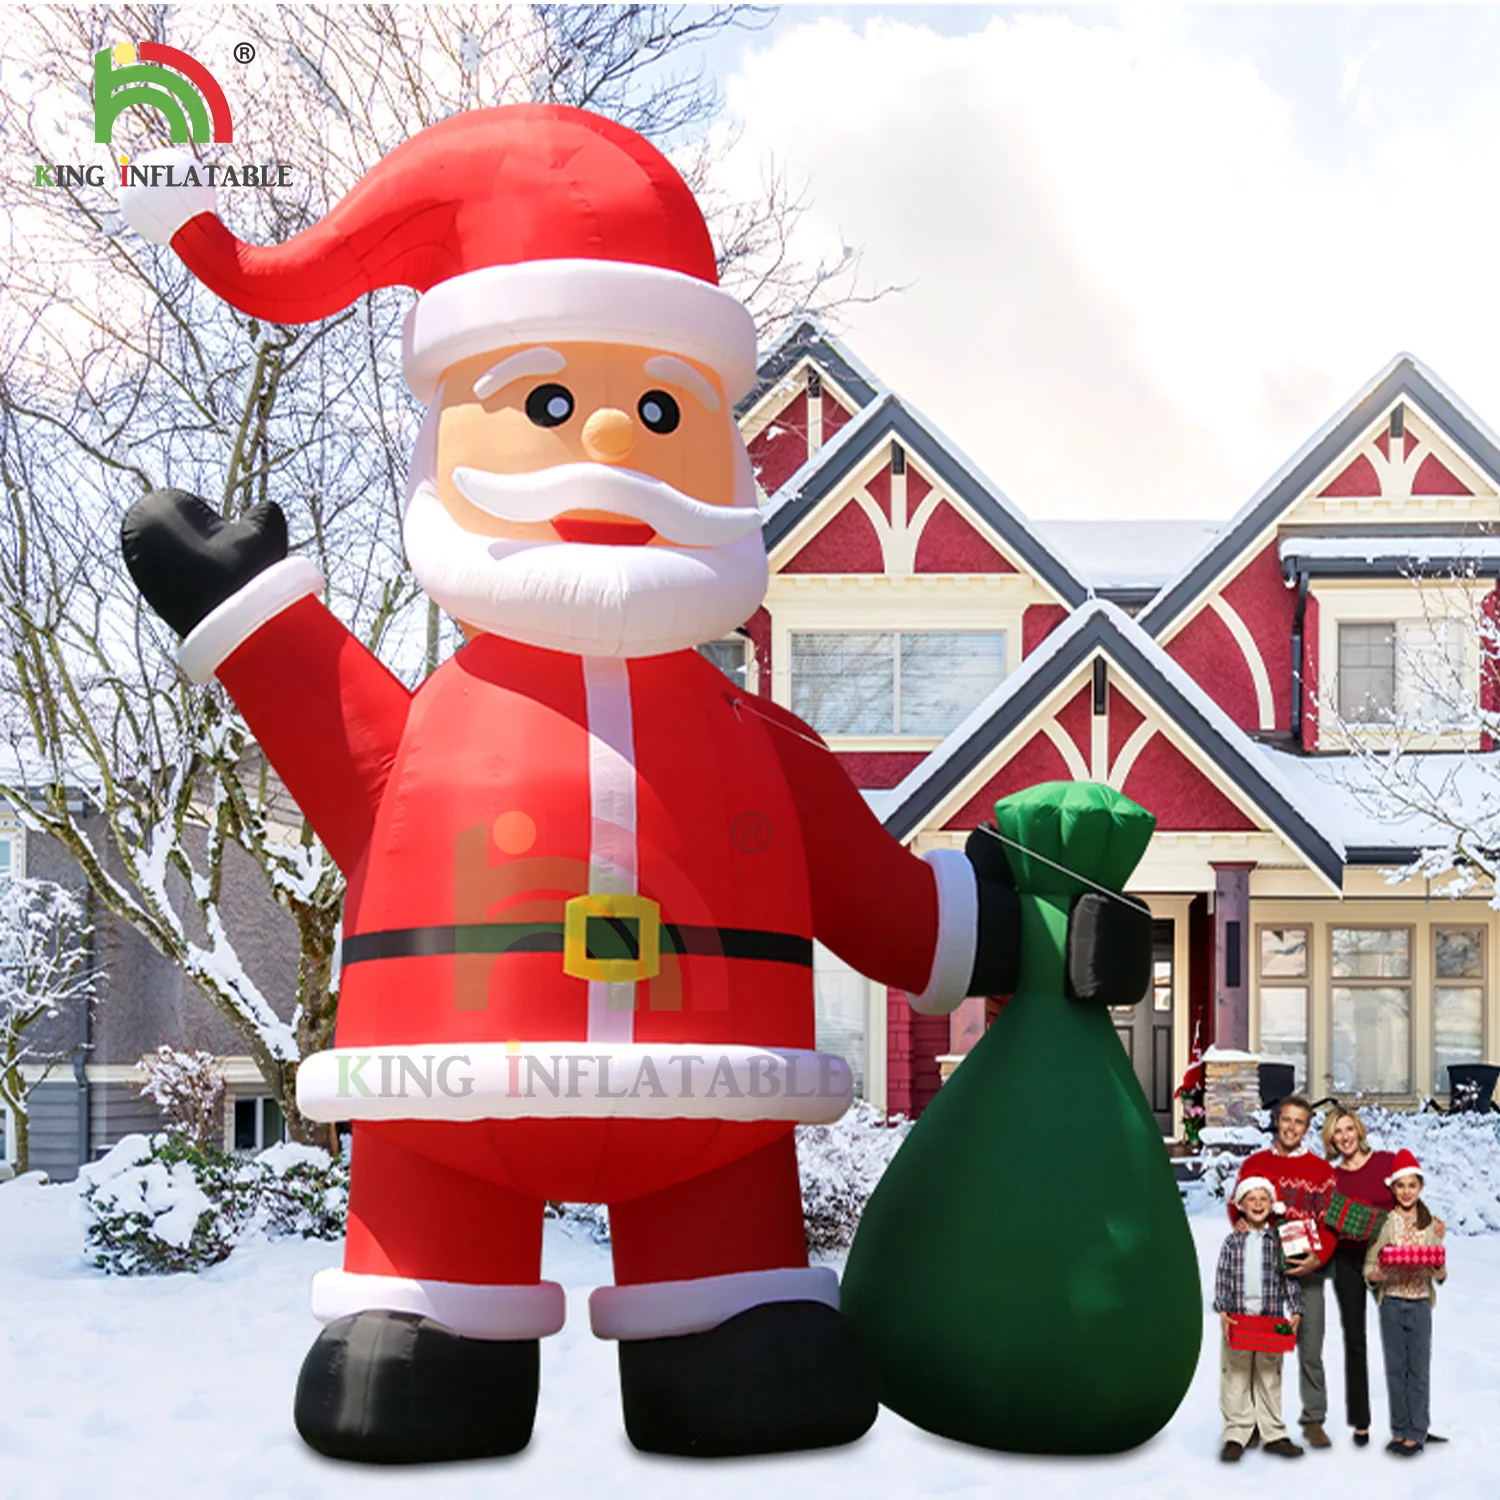 20/26/33ft Giant Inflatable Santa Claus Outdoors Christmas Father Decorations Festival Party Xmas Celebration With Blower Oxford christmas inflatable santa claus led 160 cm